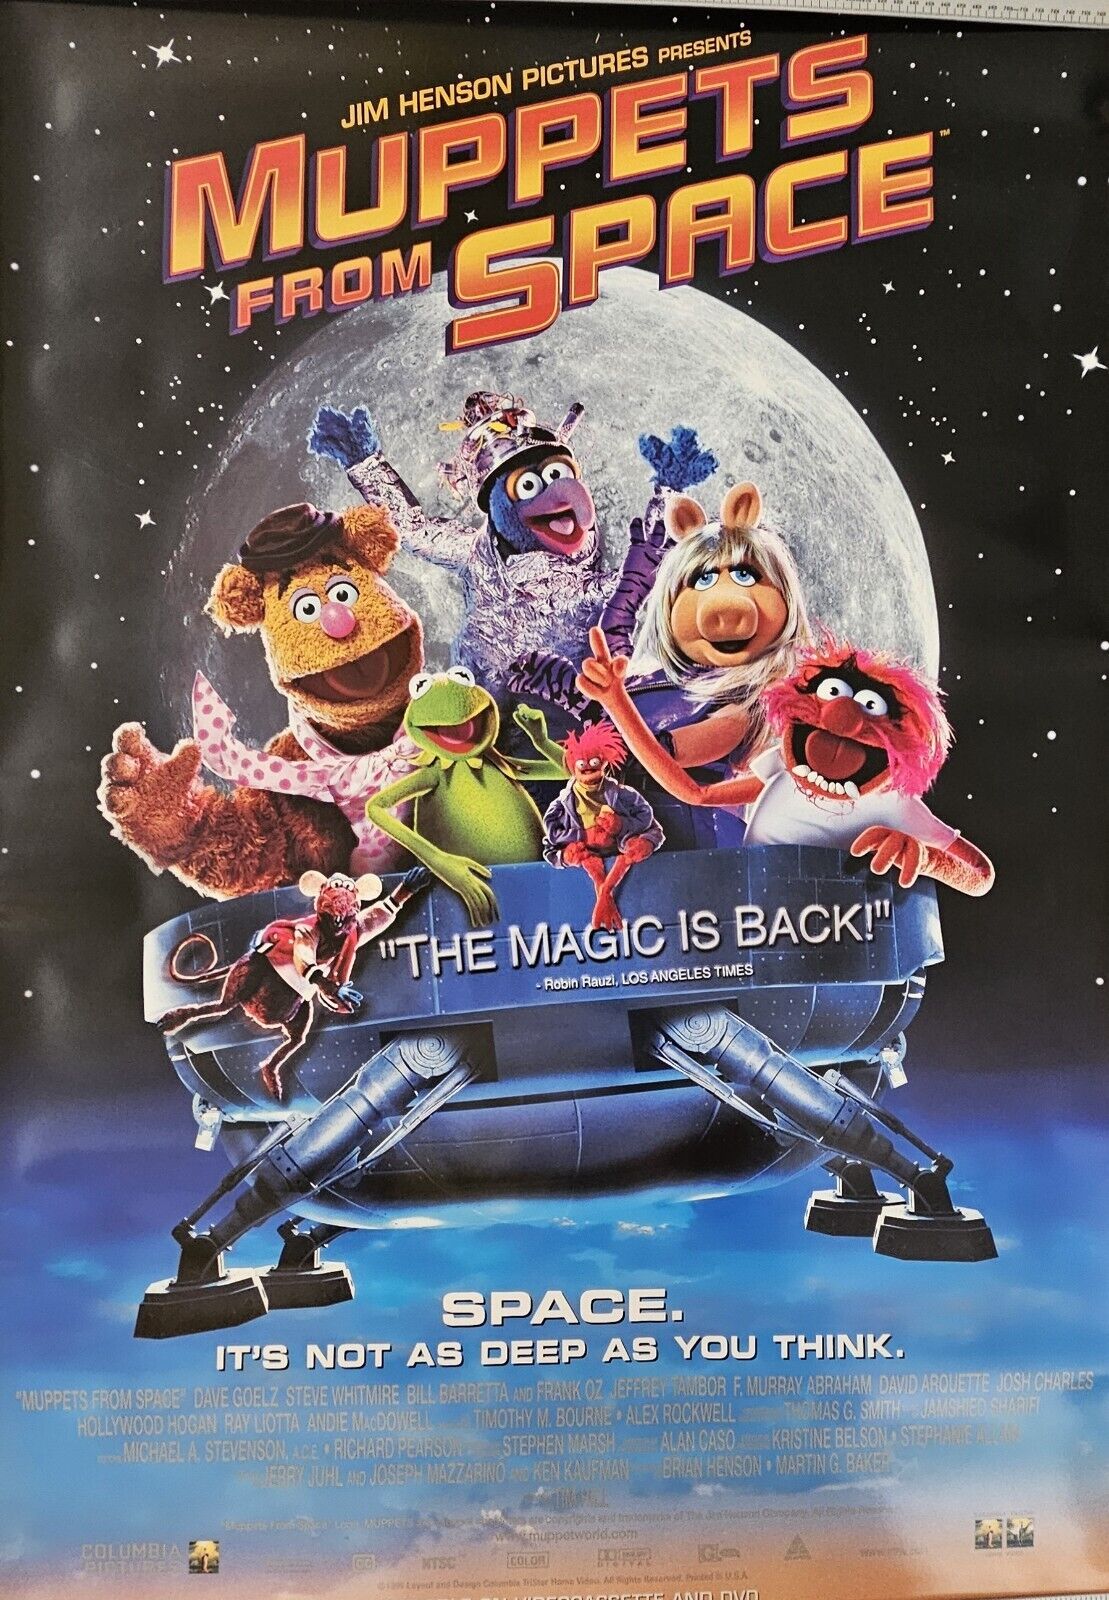 Jim Henson's Muppets from outer space 27 x 40 DVD promotional Movie poster